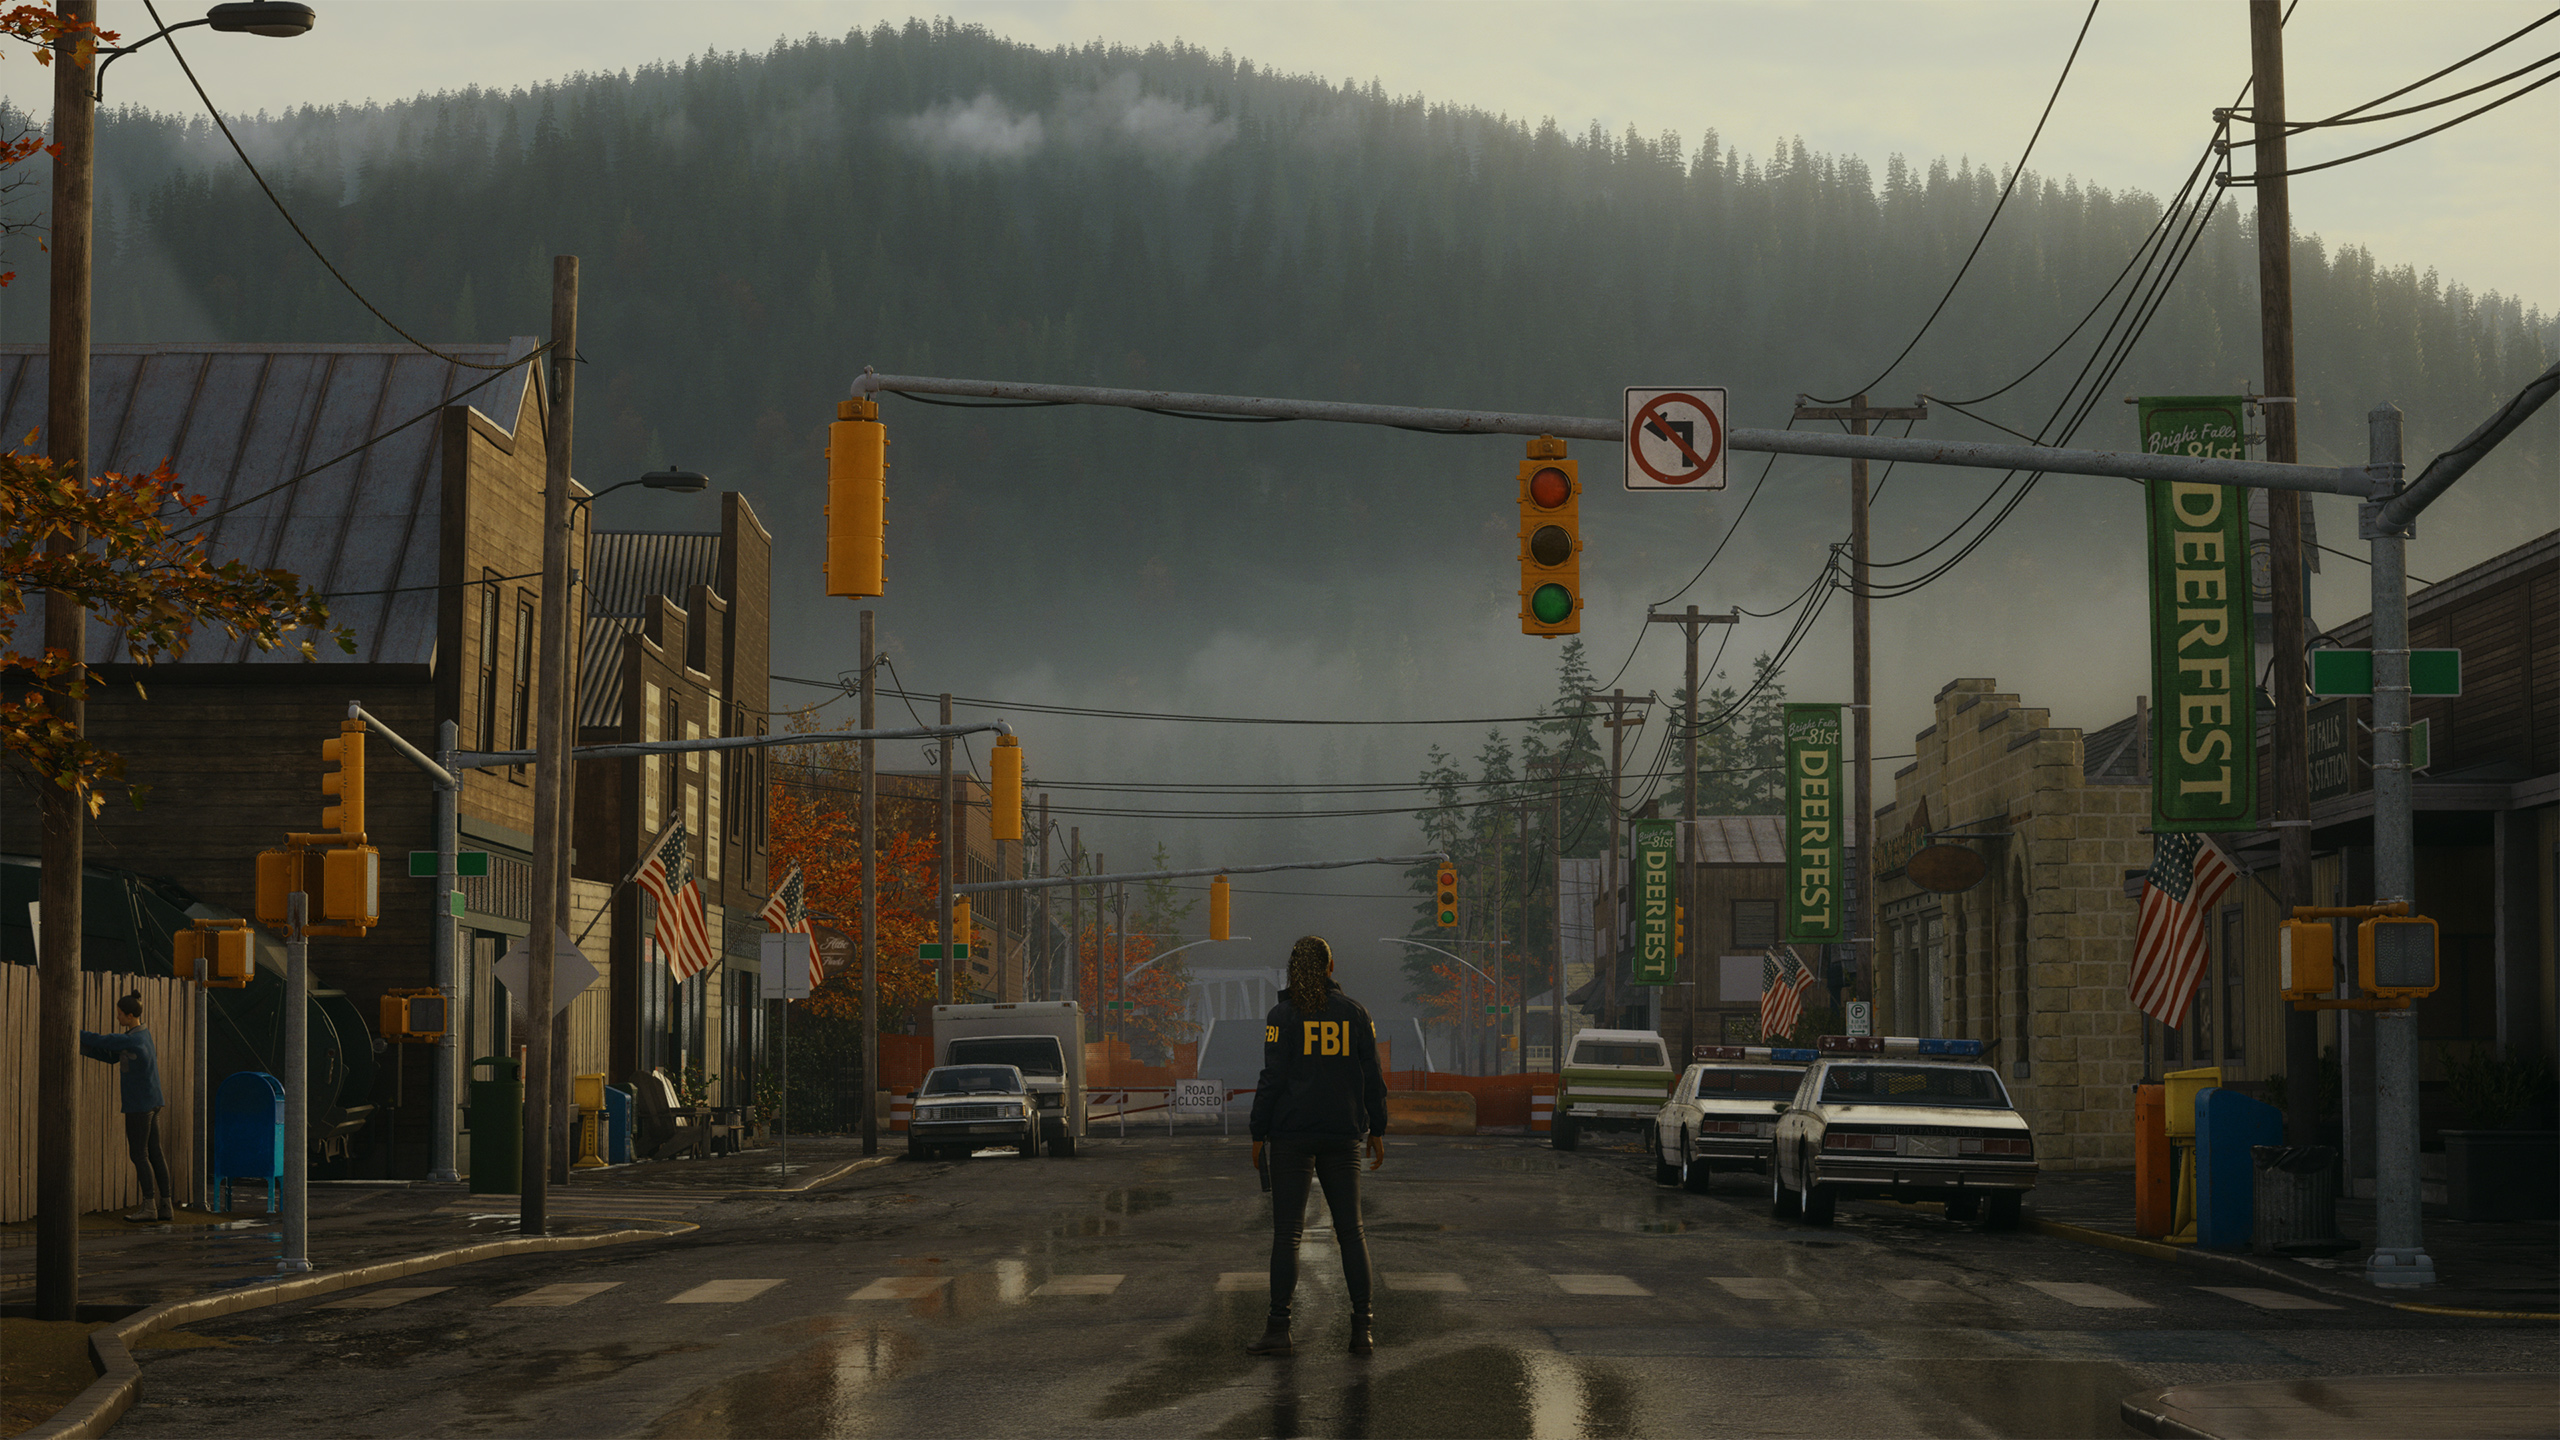 HD desktop wallpaper featuring Alan Wake 2 with a mysterious figure standing in the center of a foggy, small-town street, surrounded by forested hills in the background, setting a suspenseful scene.